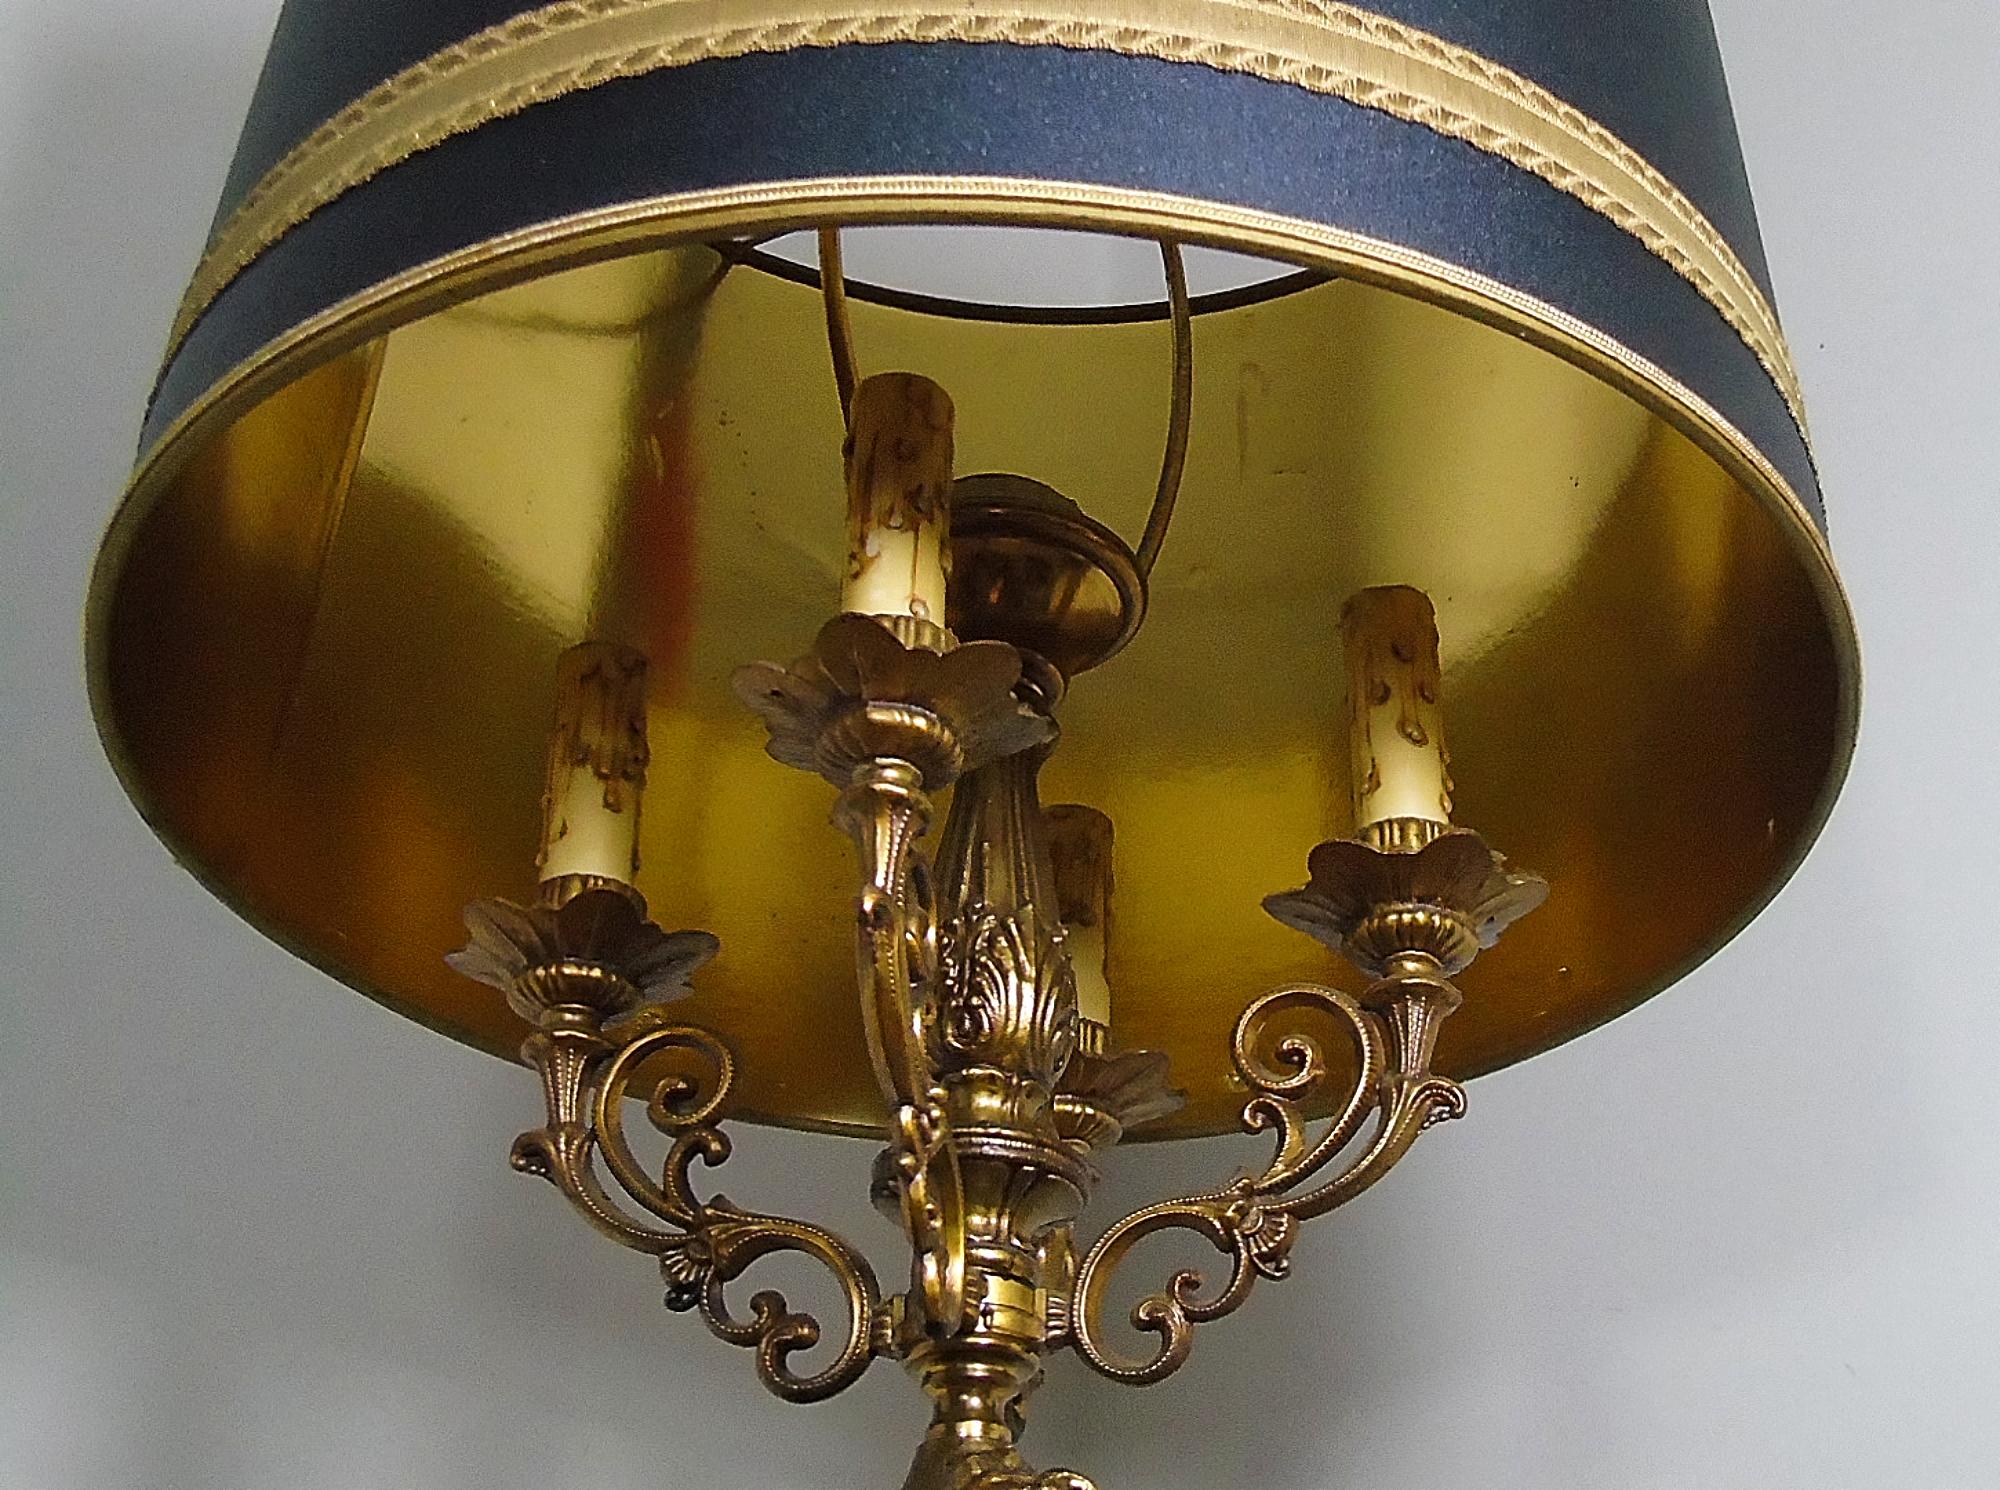 Huge Gilt Metal Empire Style Table Lamps, set of two 1960s (Stein)